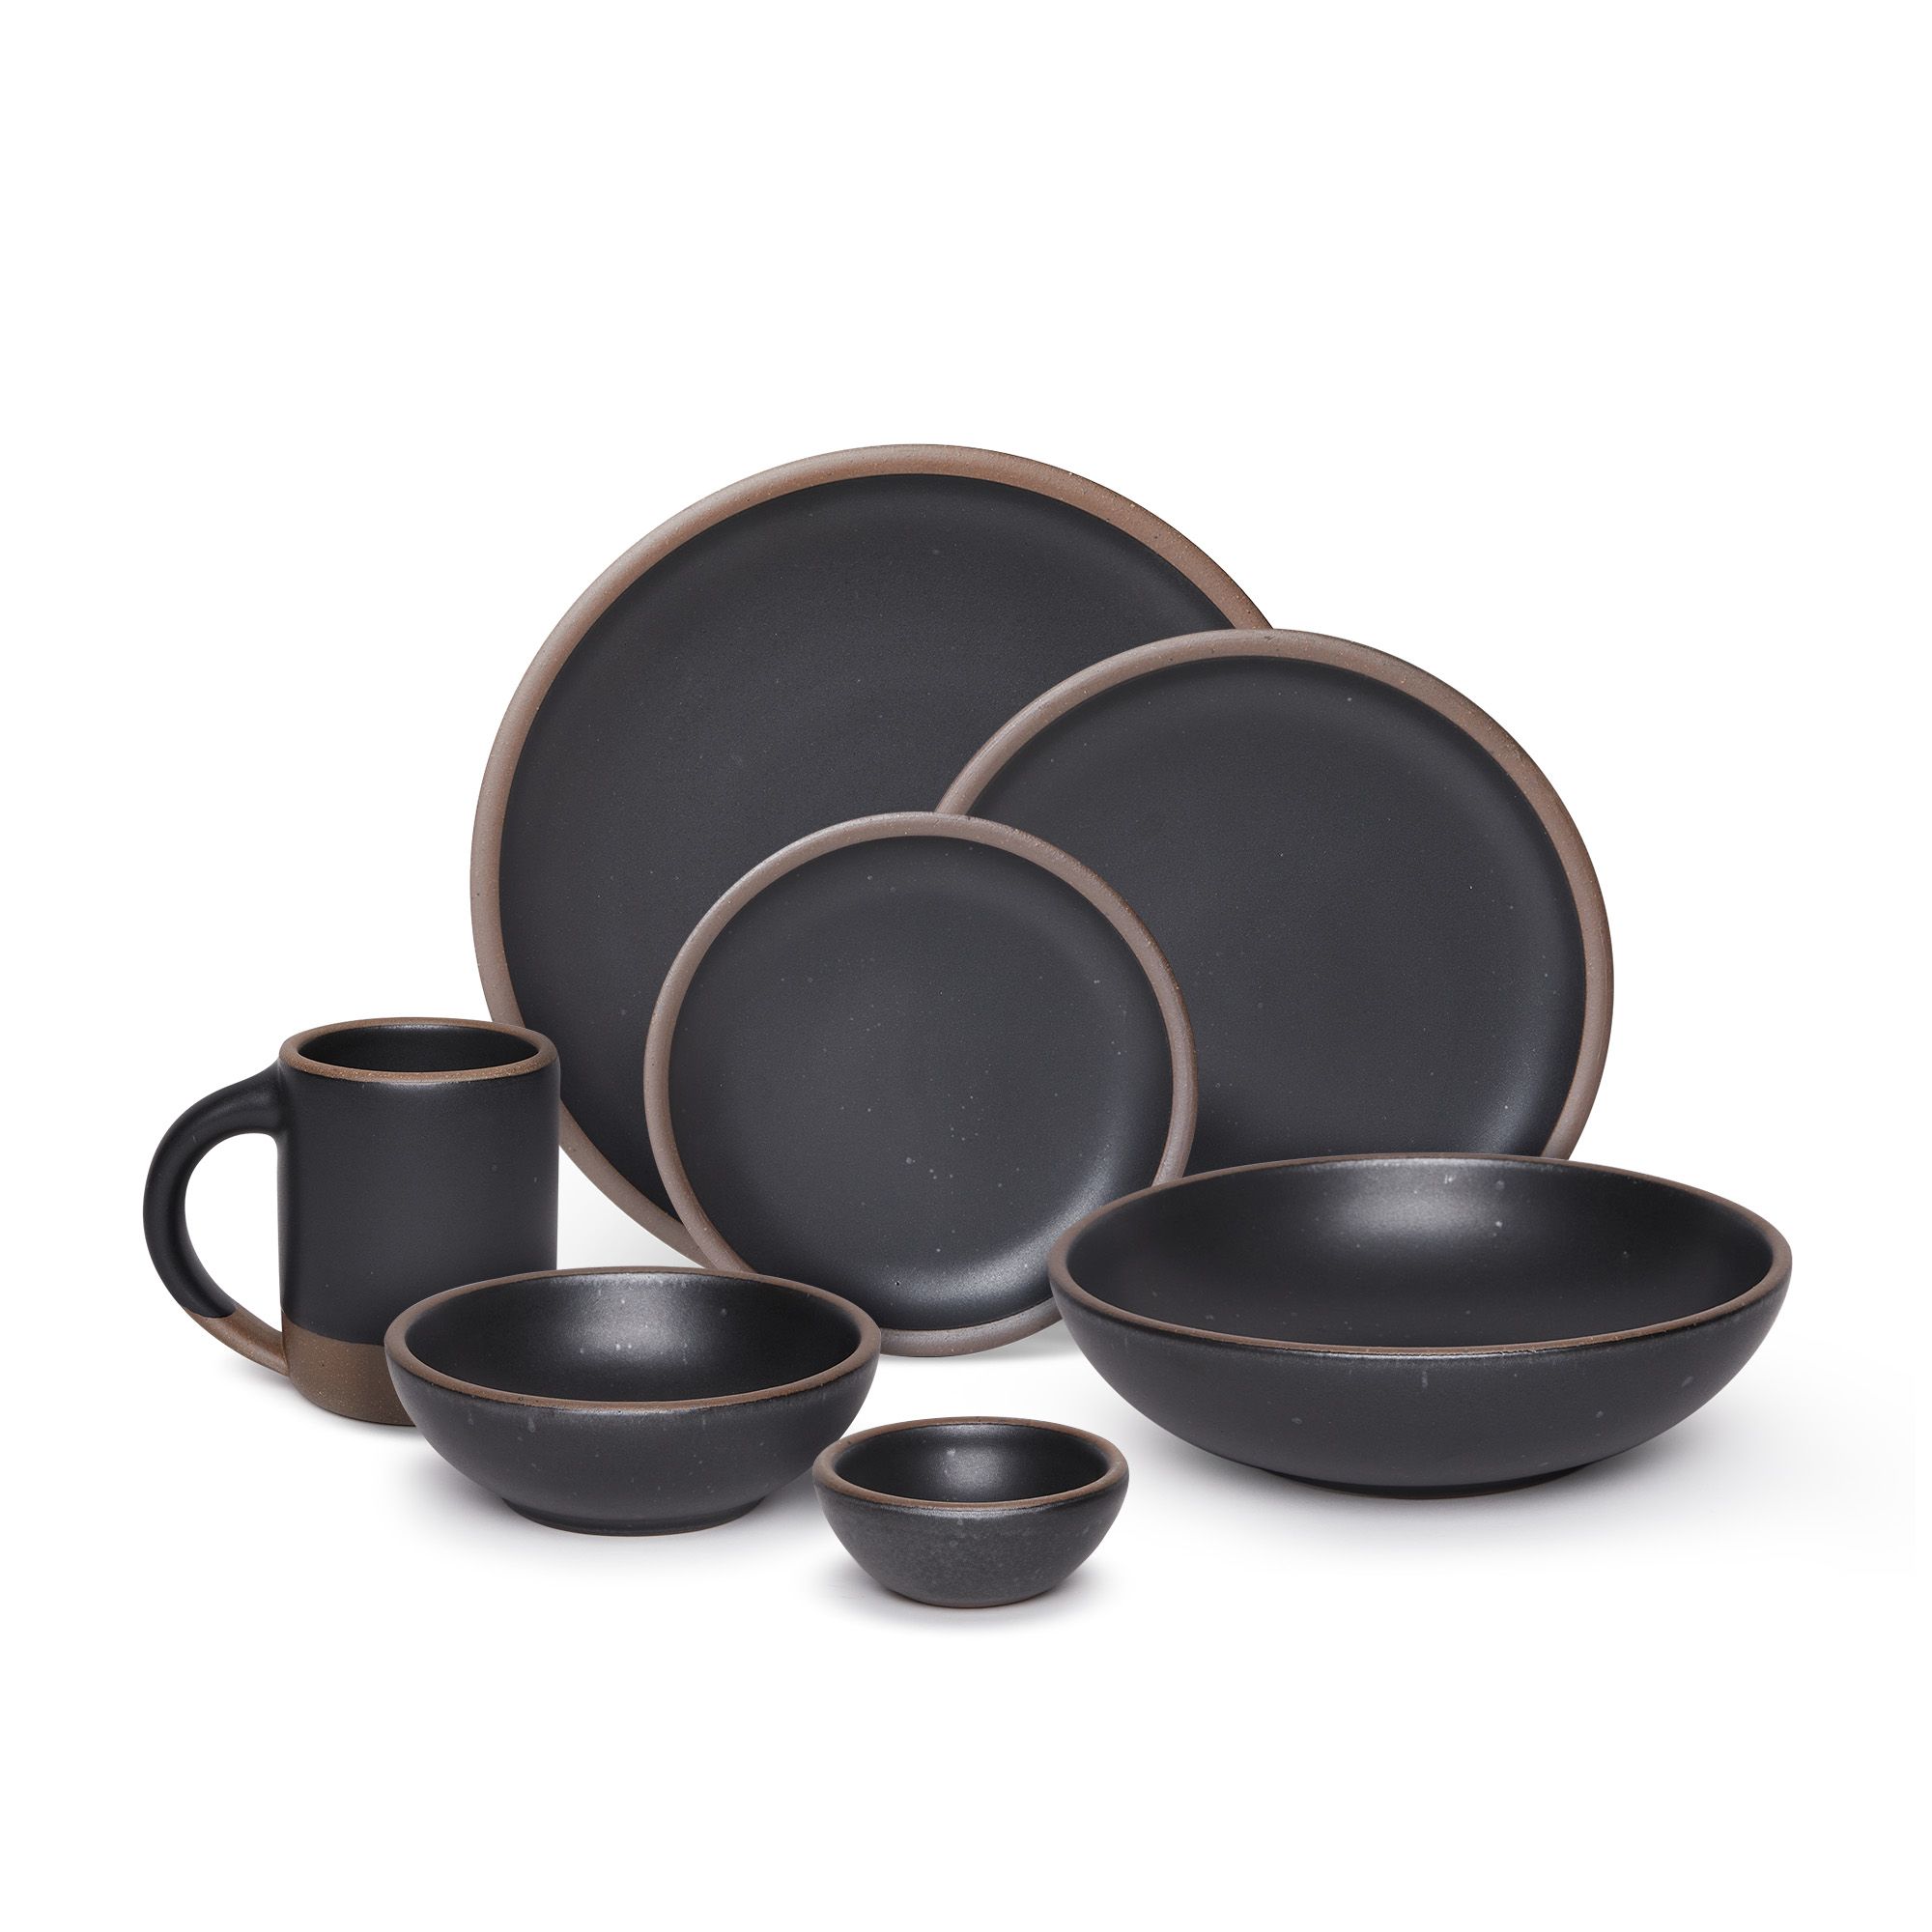 The Mug, bitty bowl, breakfast bowl, everyday bowl, cake plate, side plate and dinner plate paired together in a graphite black color featuring iron speckles